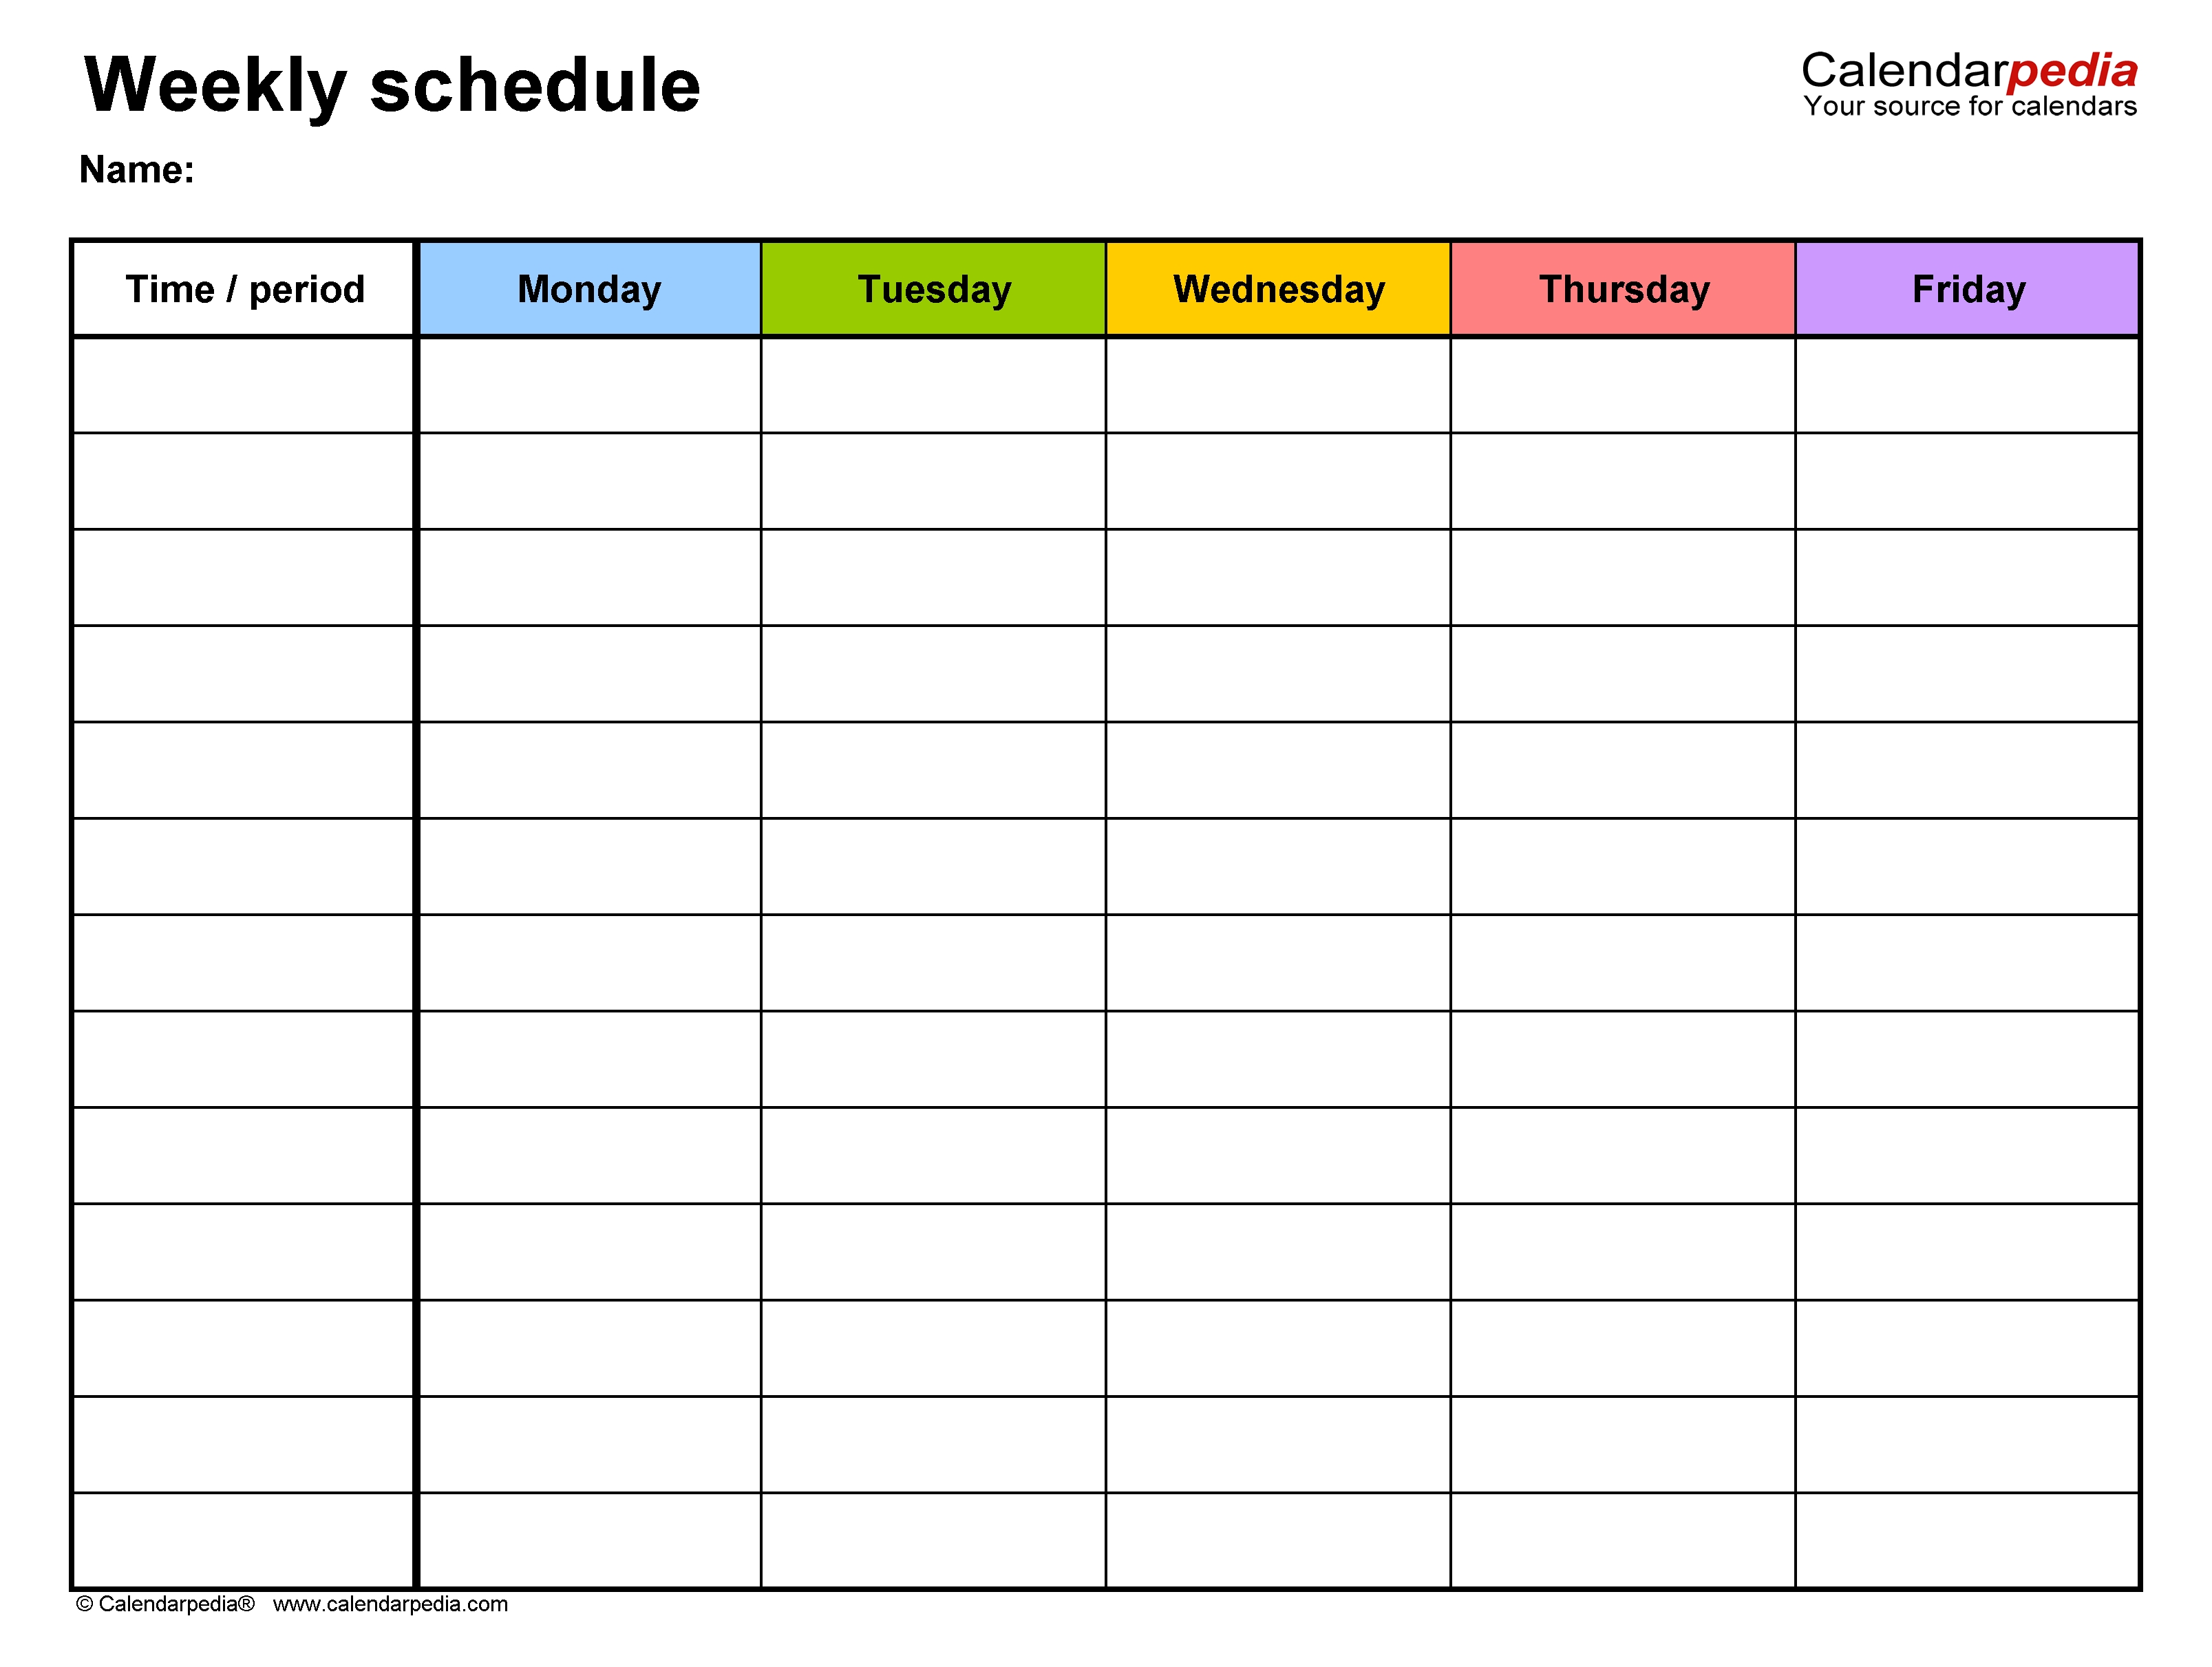 Free Weekly Schedules For Word - 18 Templates Free 7 Day Calendar Printable Template